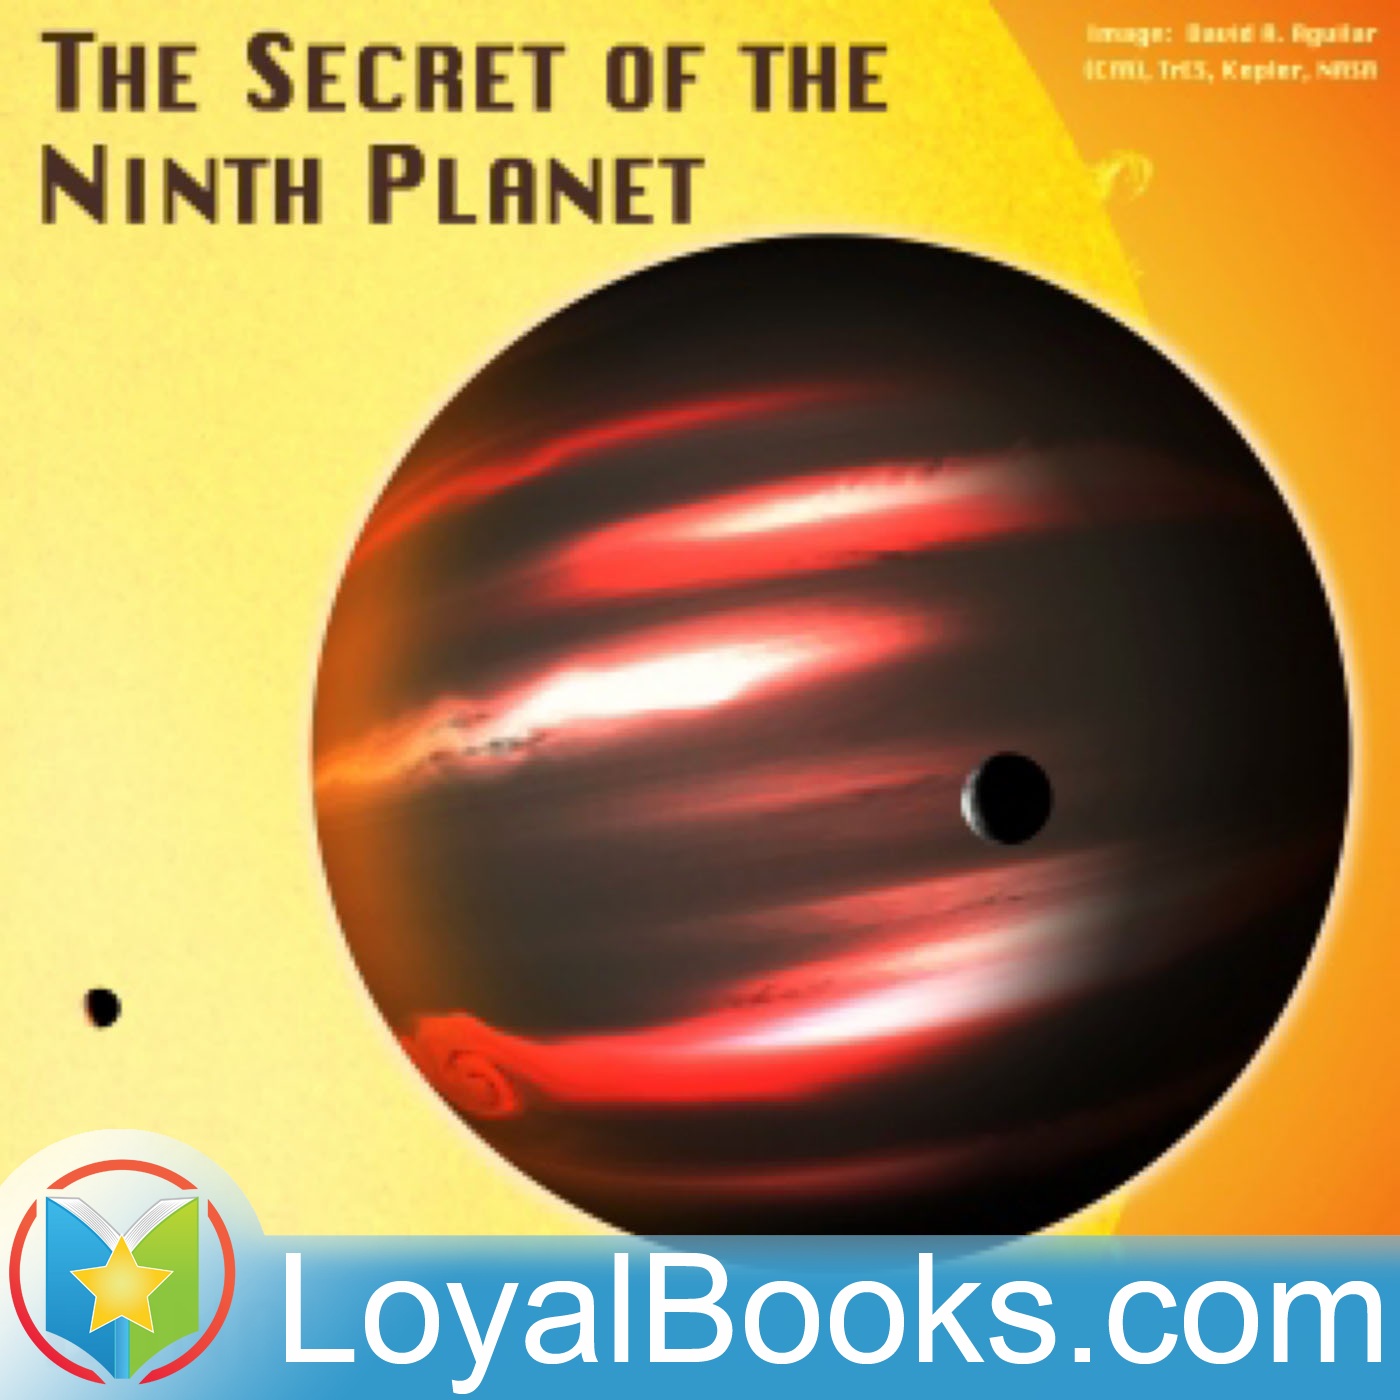 The Secret Of The Ninth Planet by Donald Wollheim